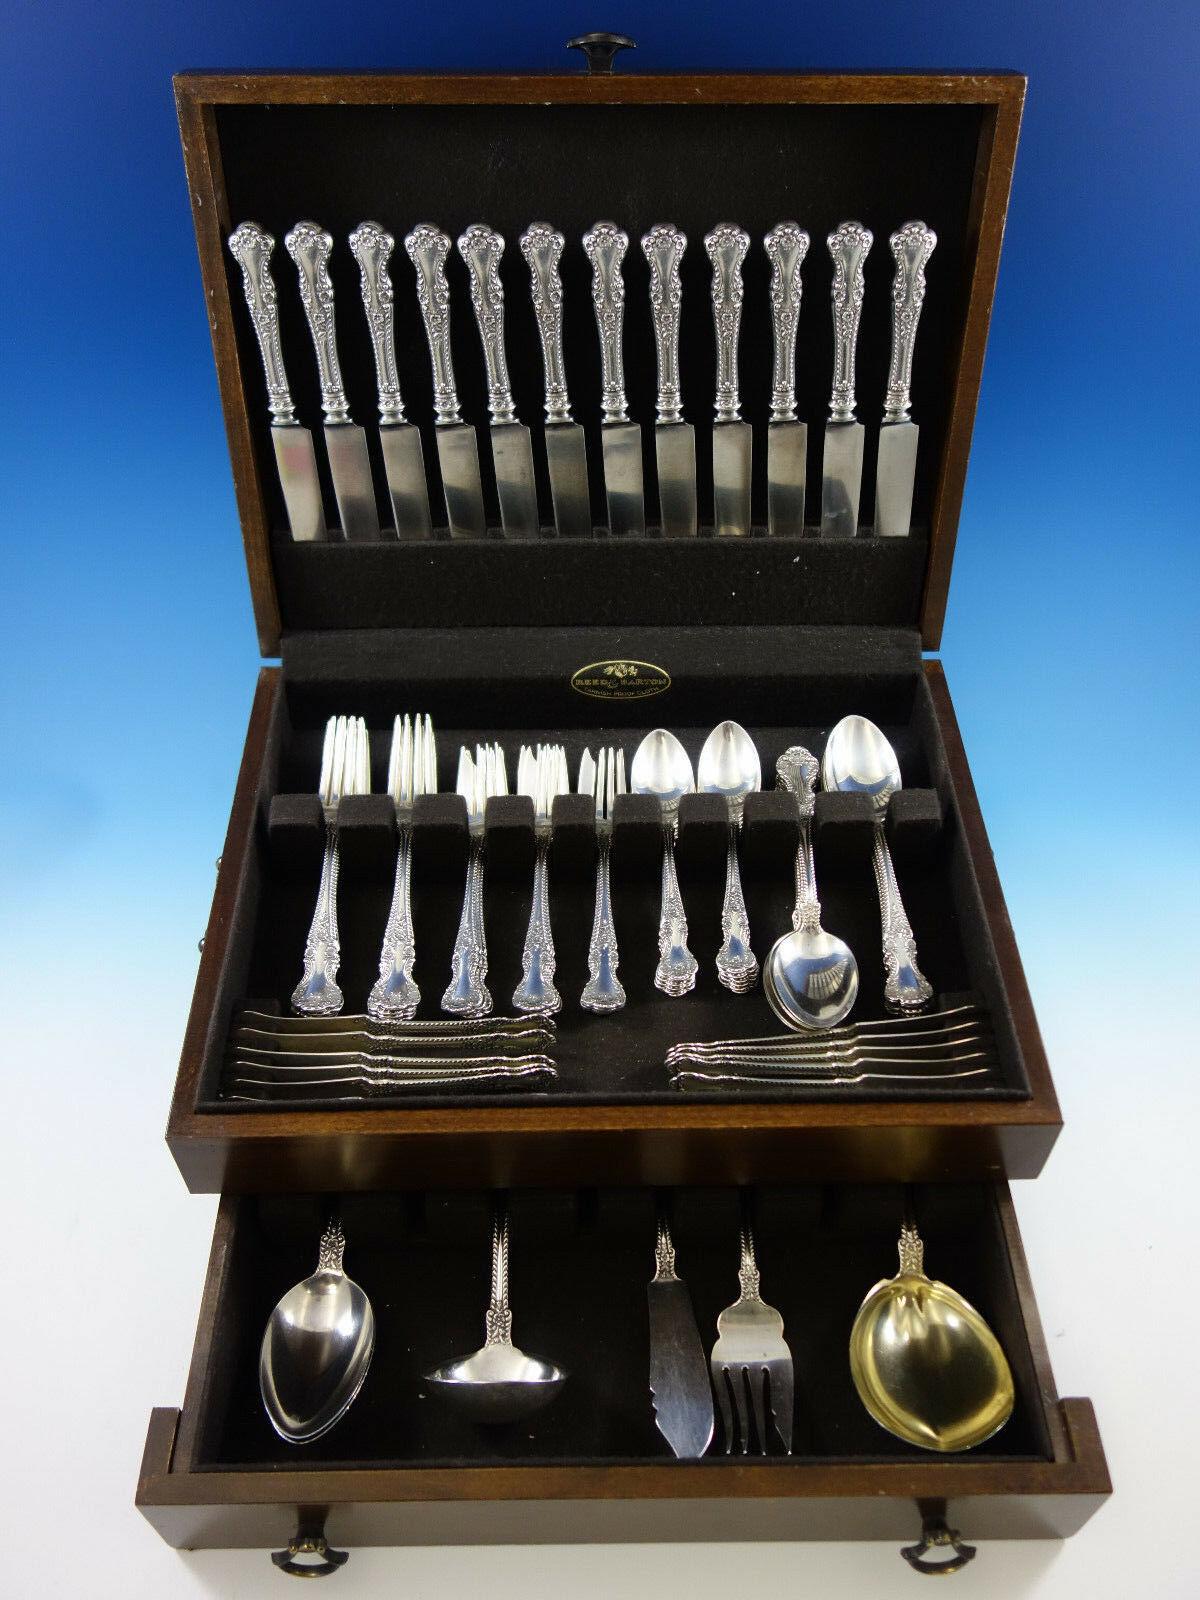 Exquisite Cambridge by Gorham sterling silver flatware set - 78 pieces. This set includes:

12 knives, 8 3/4